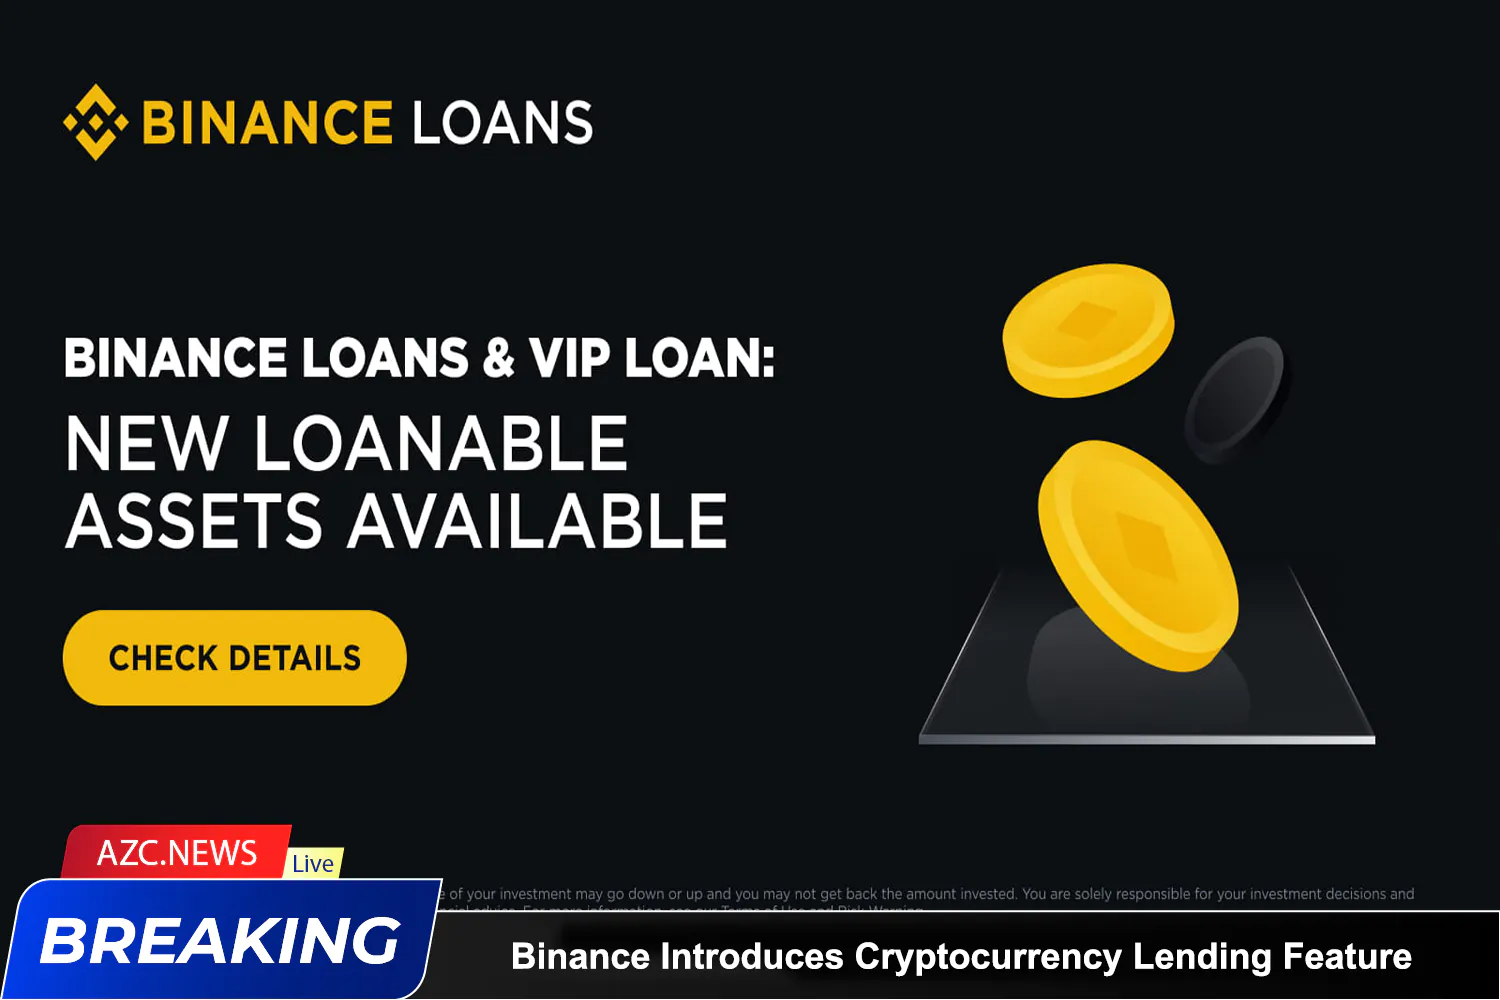 Azcnews Binance Introduces Cryptocurrency Lending Feature